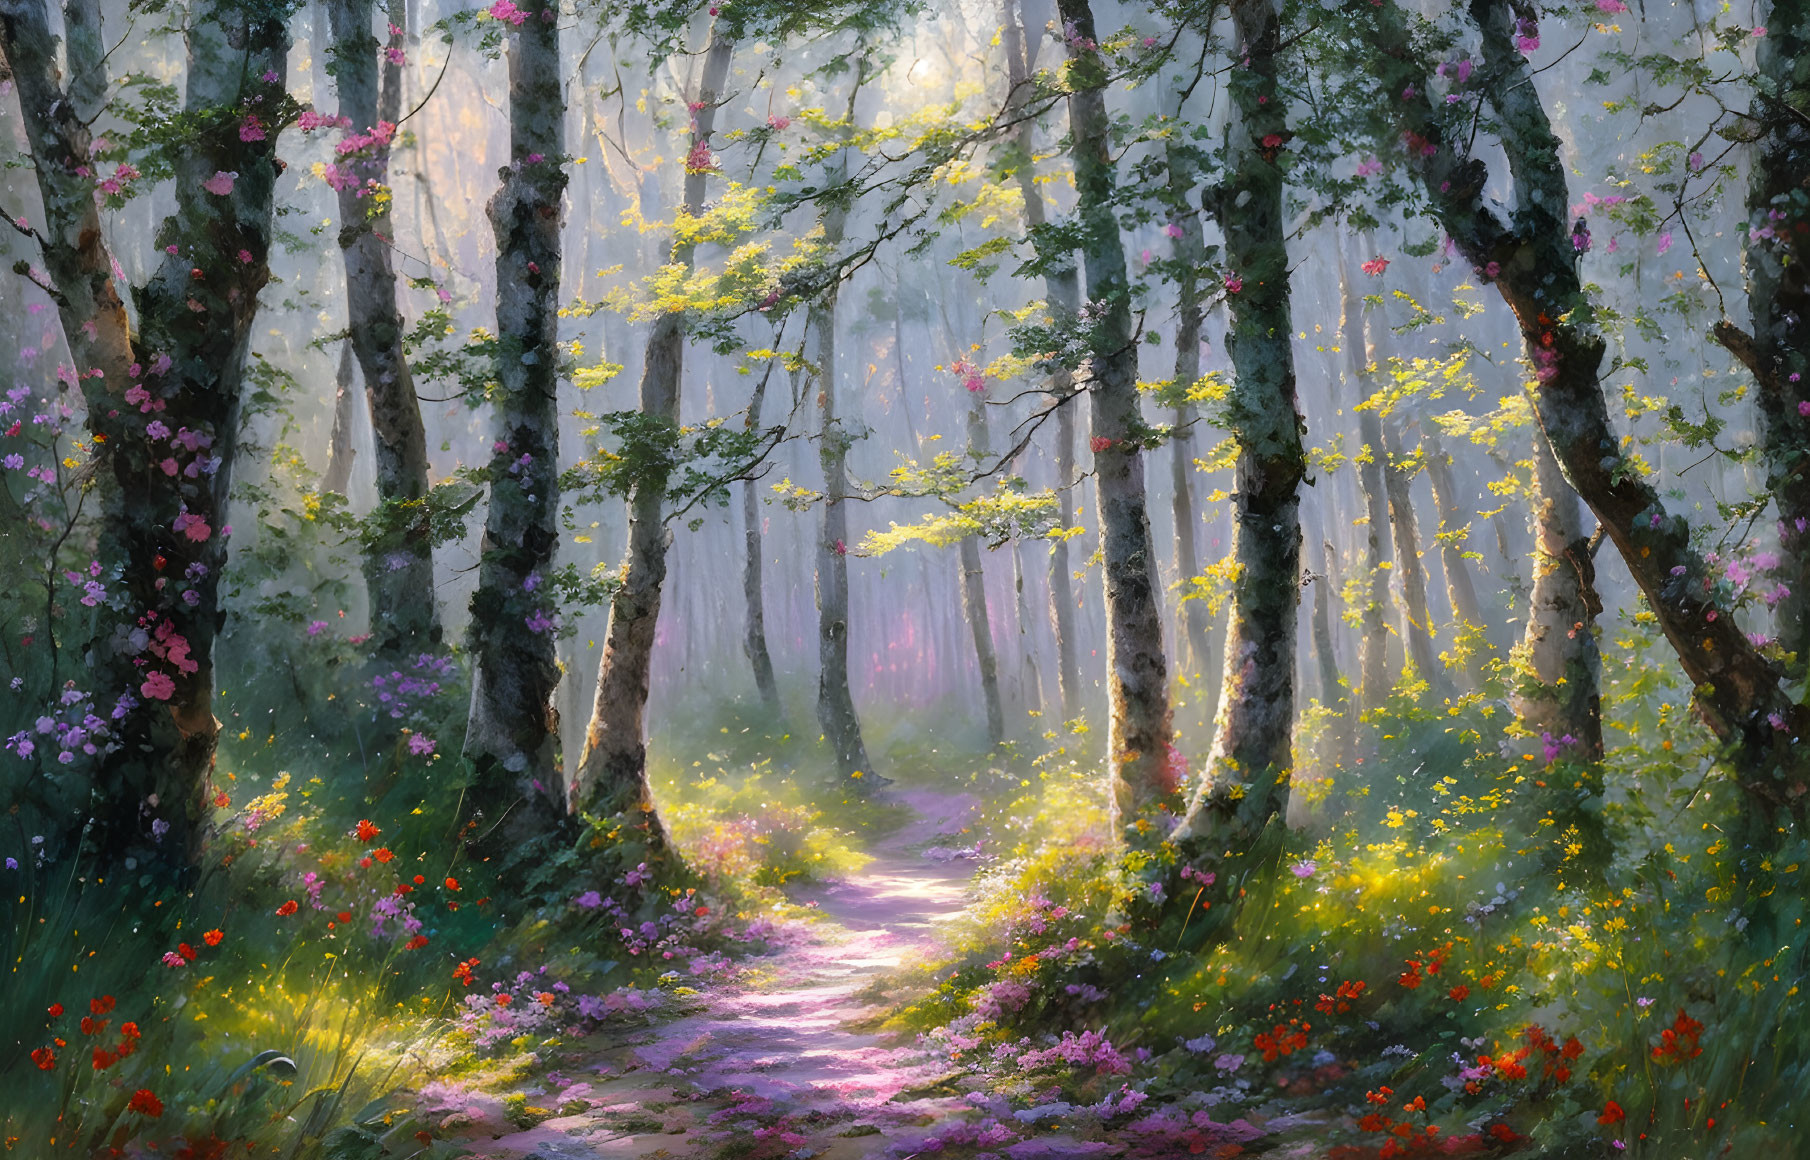 Tranquil forest path with blossoming flowers and mist-filtered sunlight